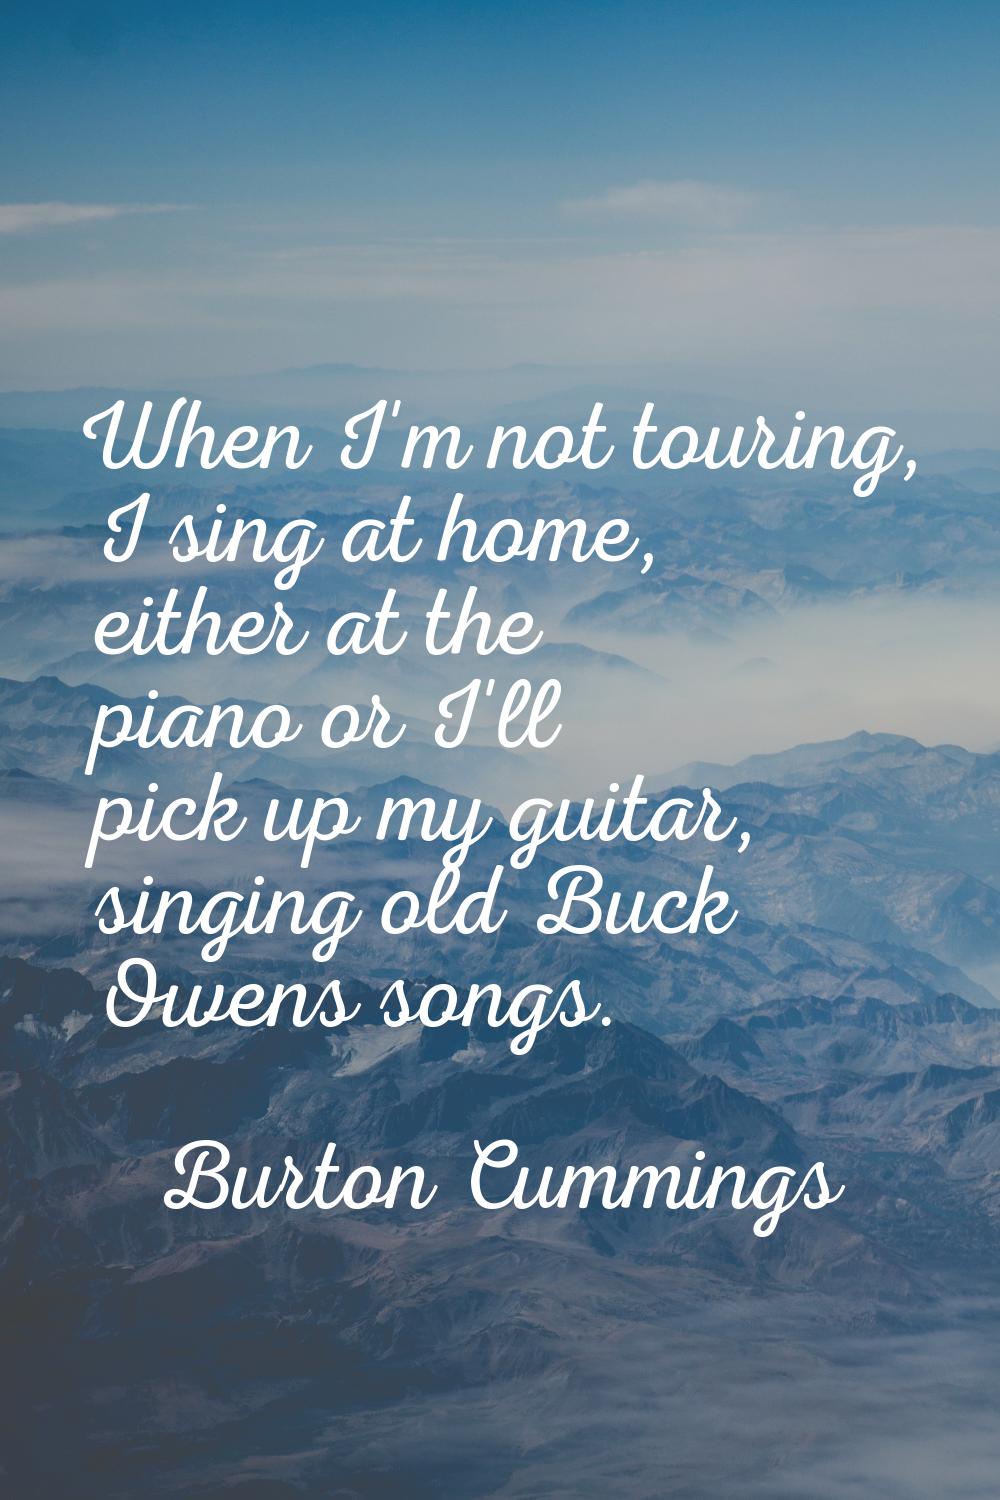 When I'm not touring, I sing at home, either at the piano or I'll pick up my guitar, singing old Bu